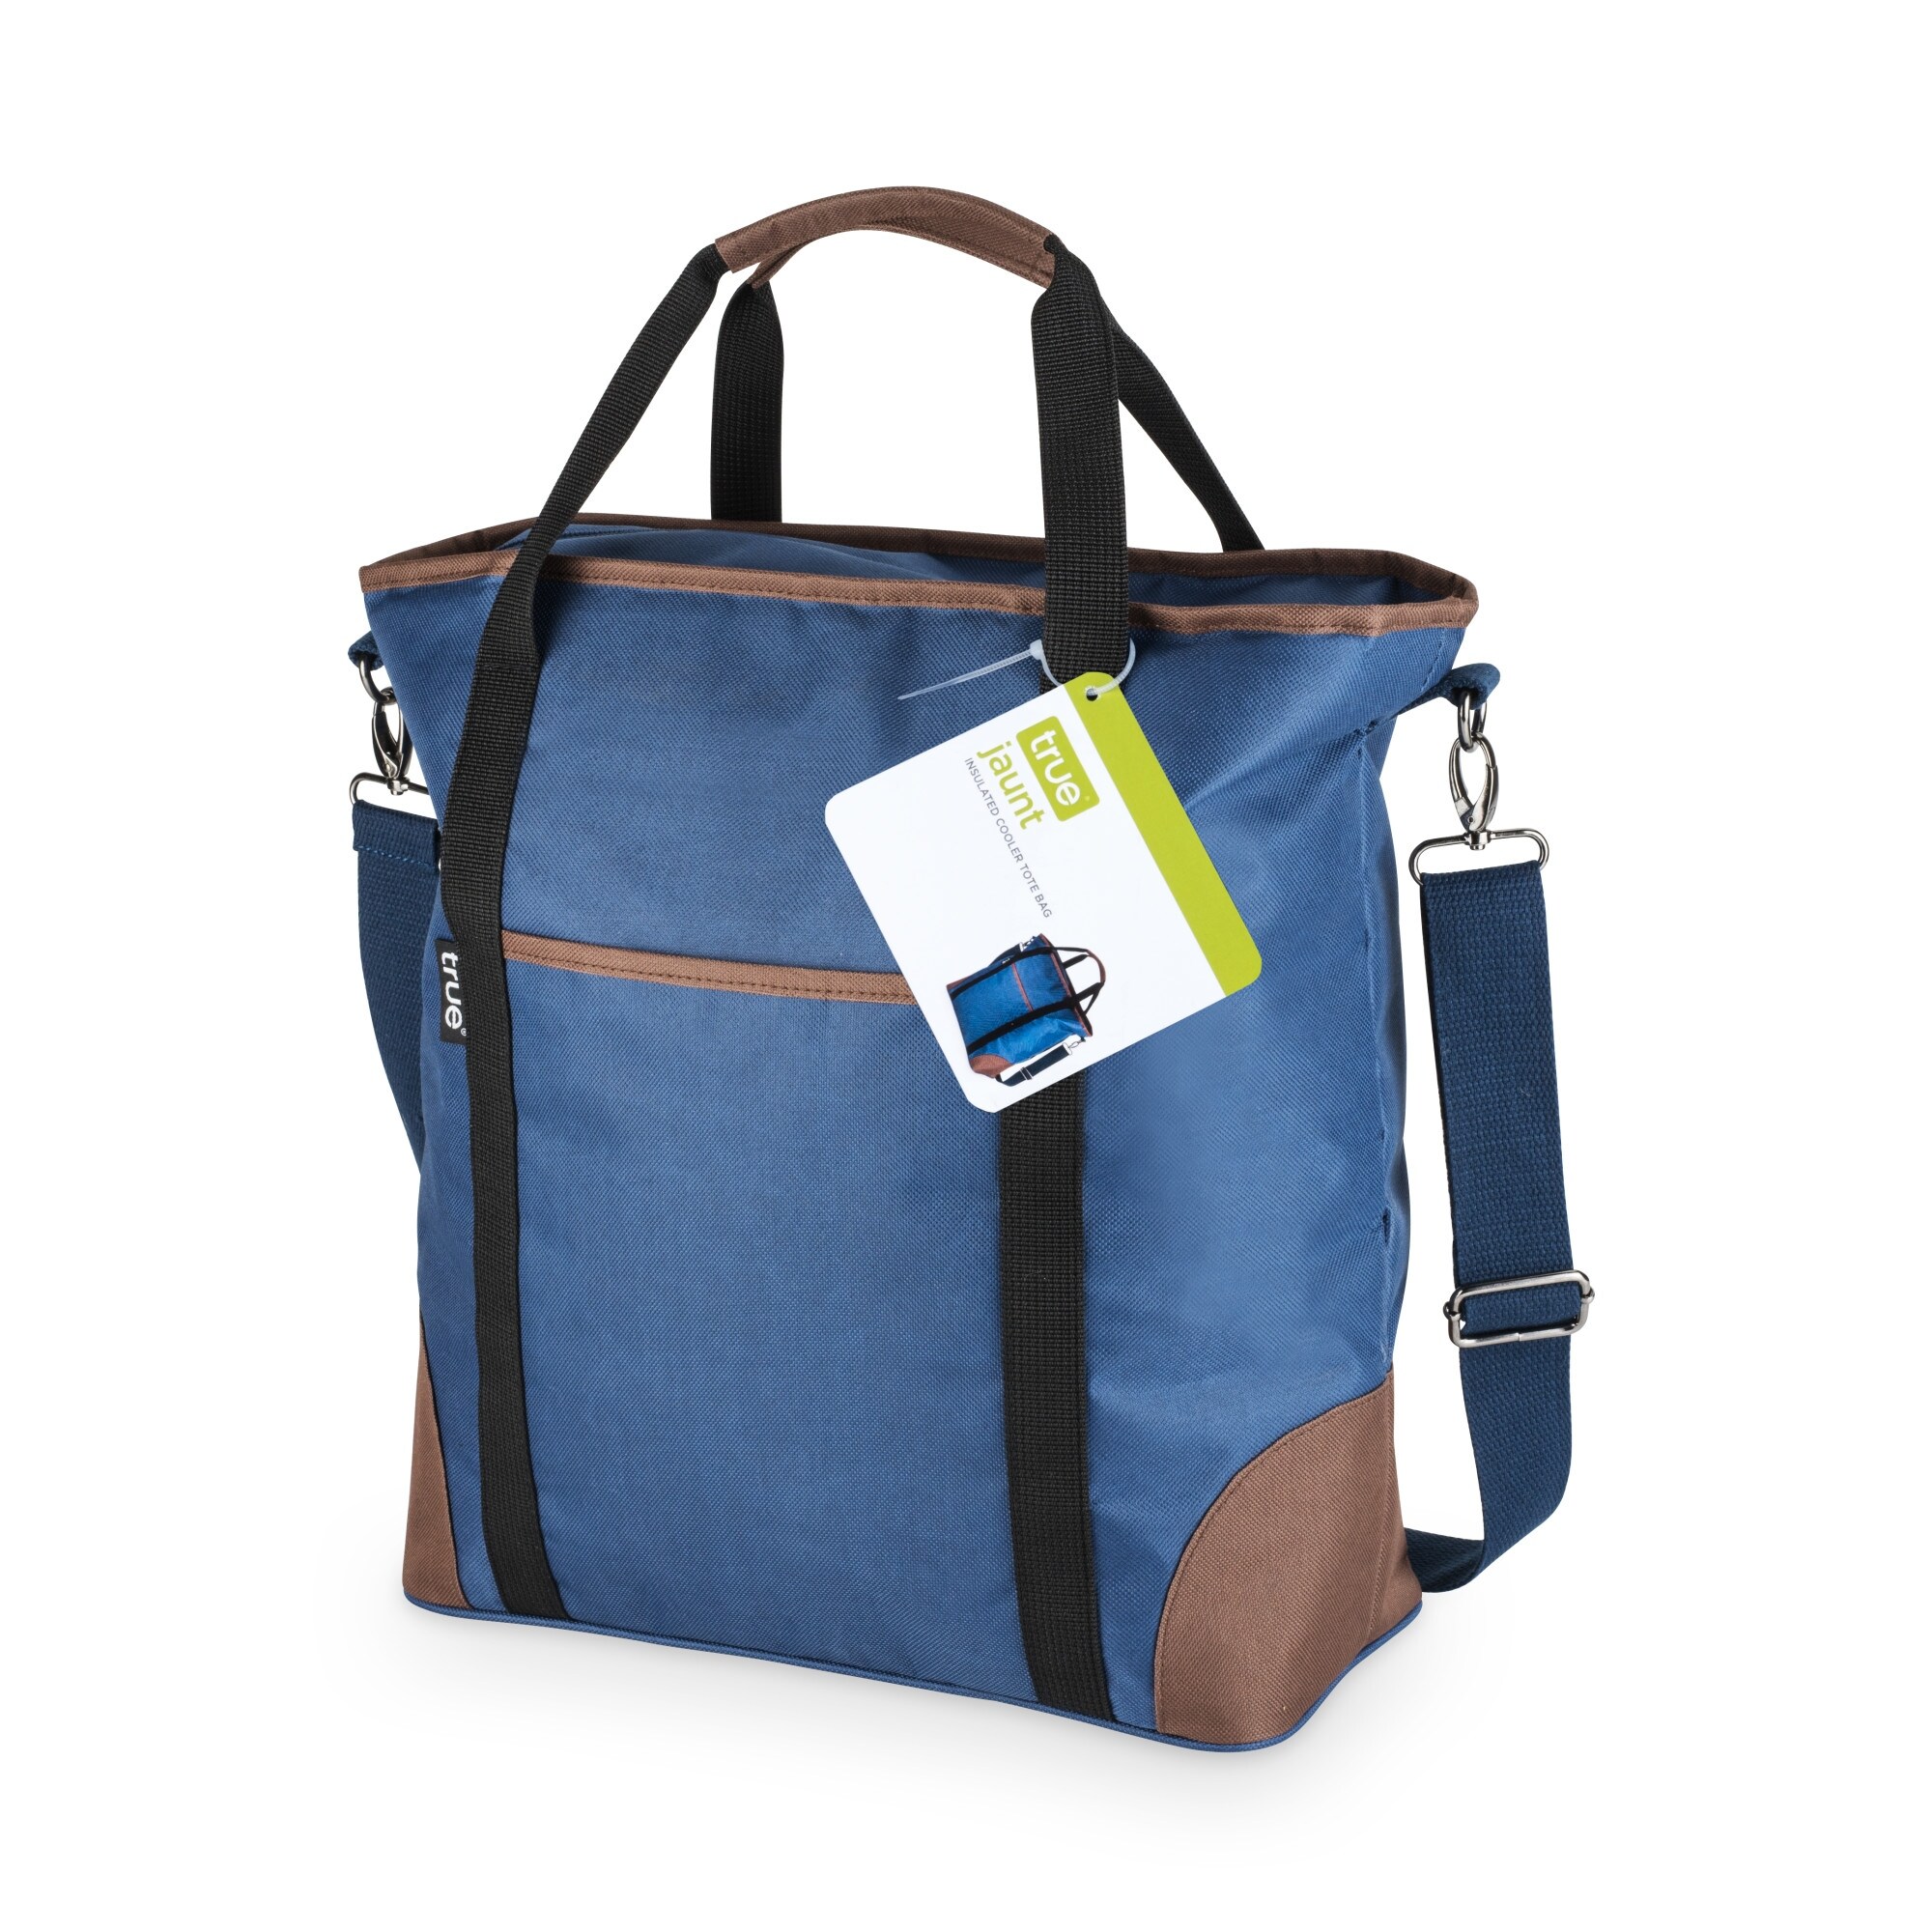 Insulated Cooler Tote Bag by True - 14.75" x 18"